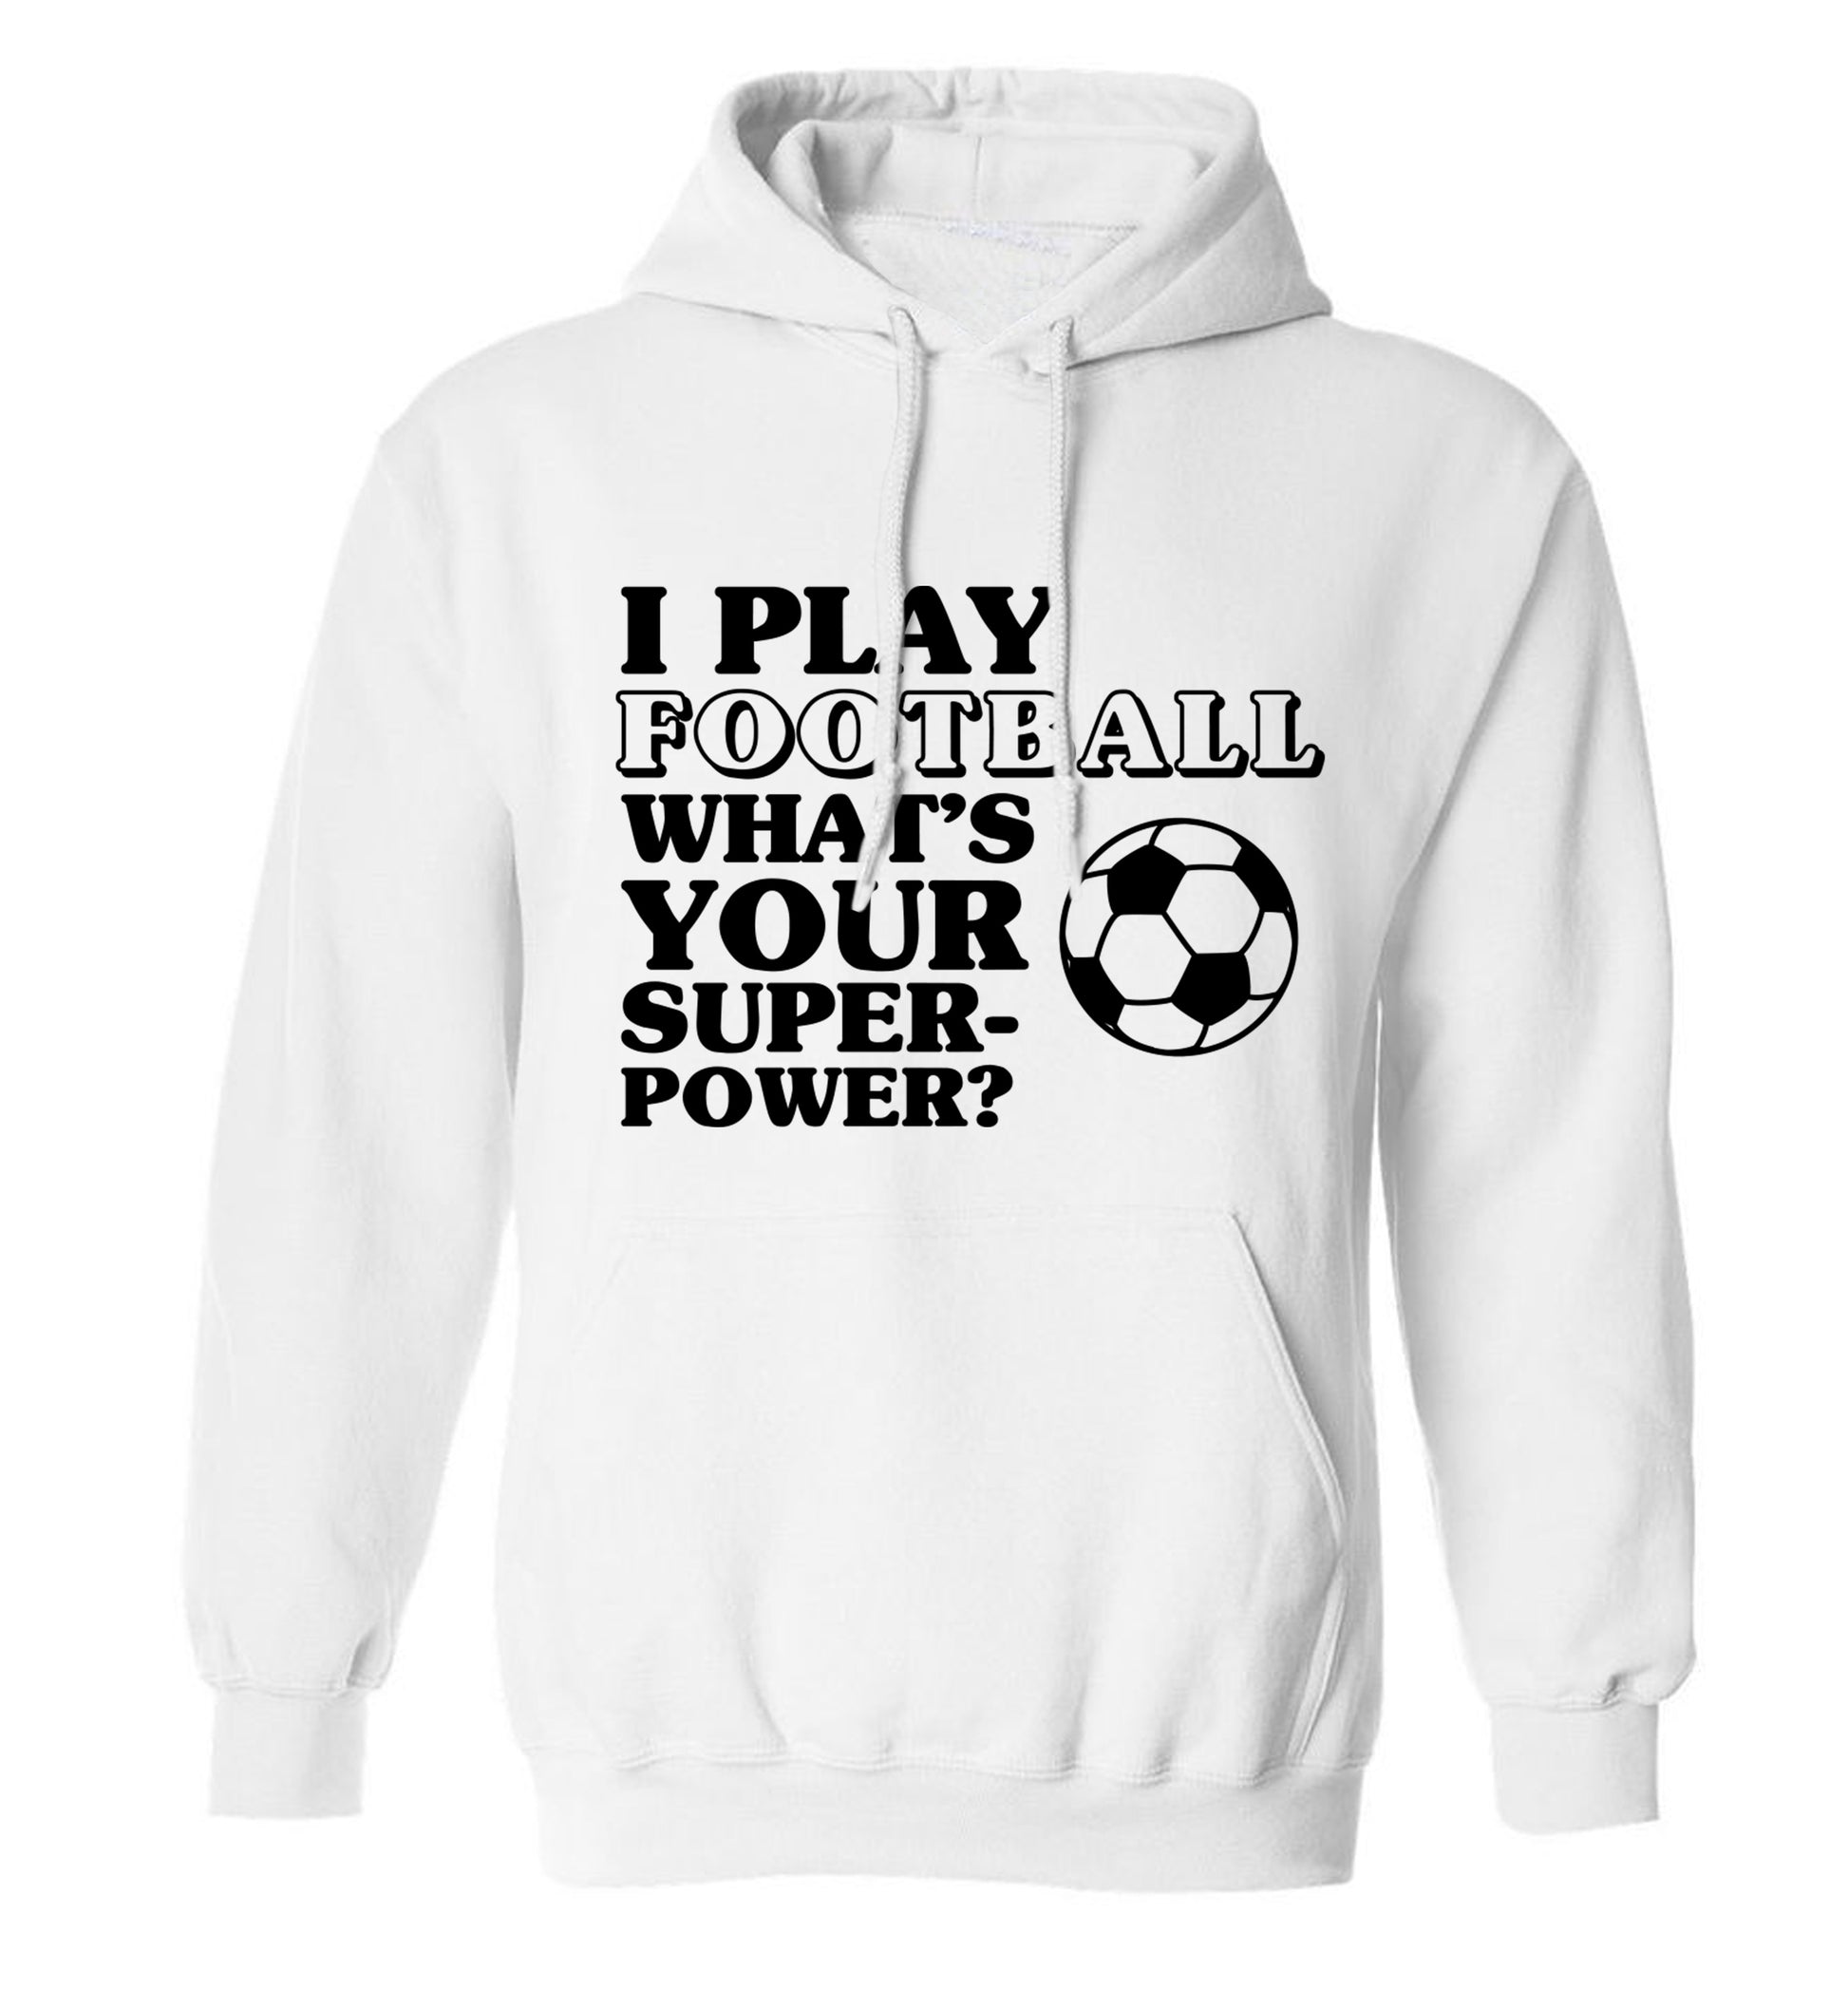 I play football what's your superpower? adults unisexwhite hoodie 2XL